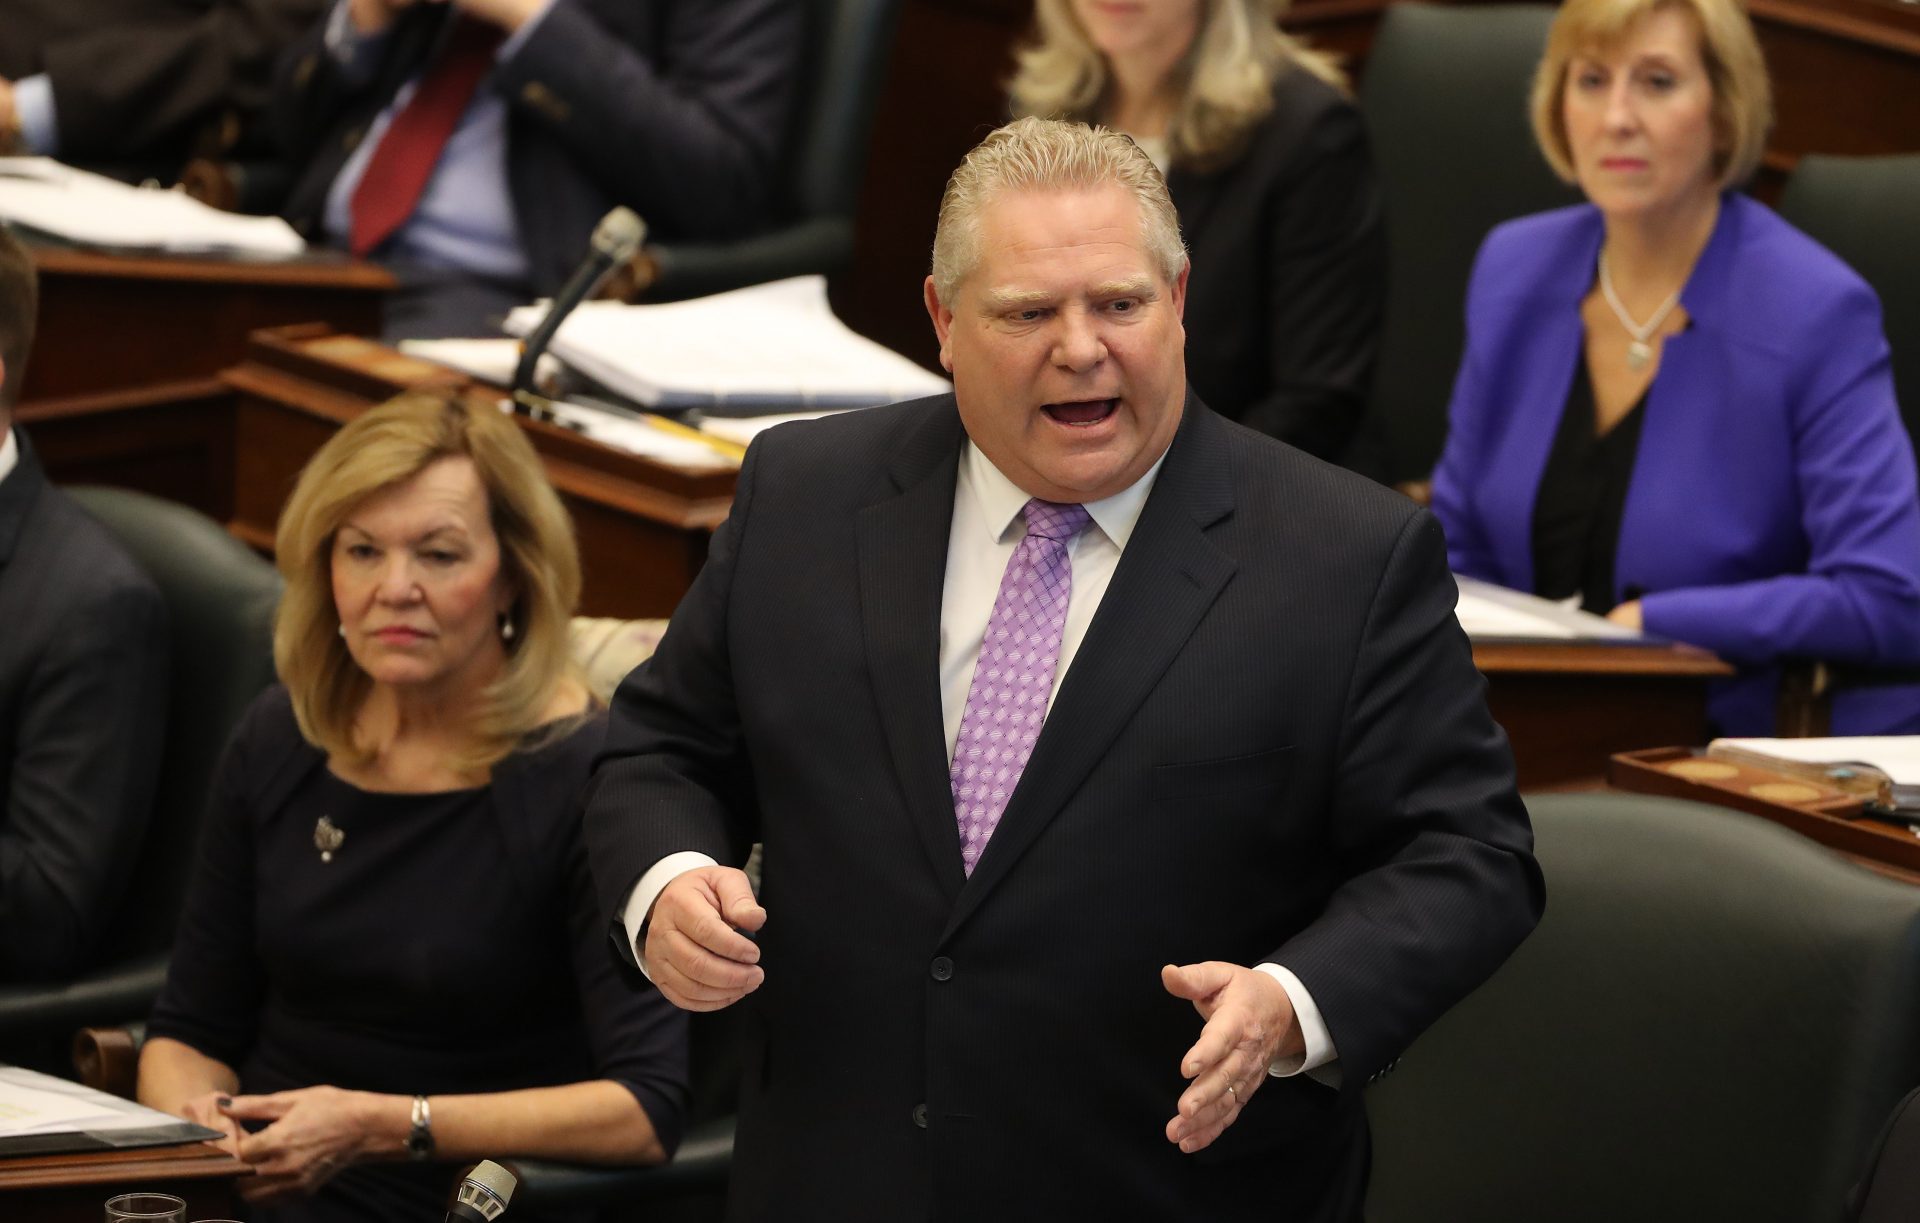 Premier Doug Ford and government double down on anti-labour rhetoric